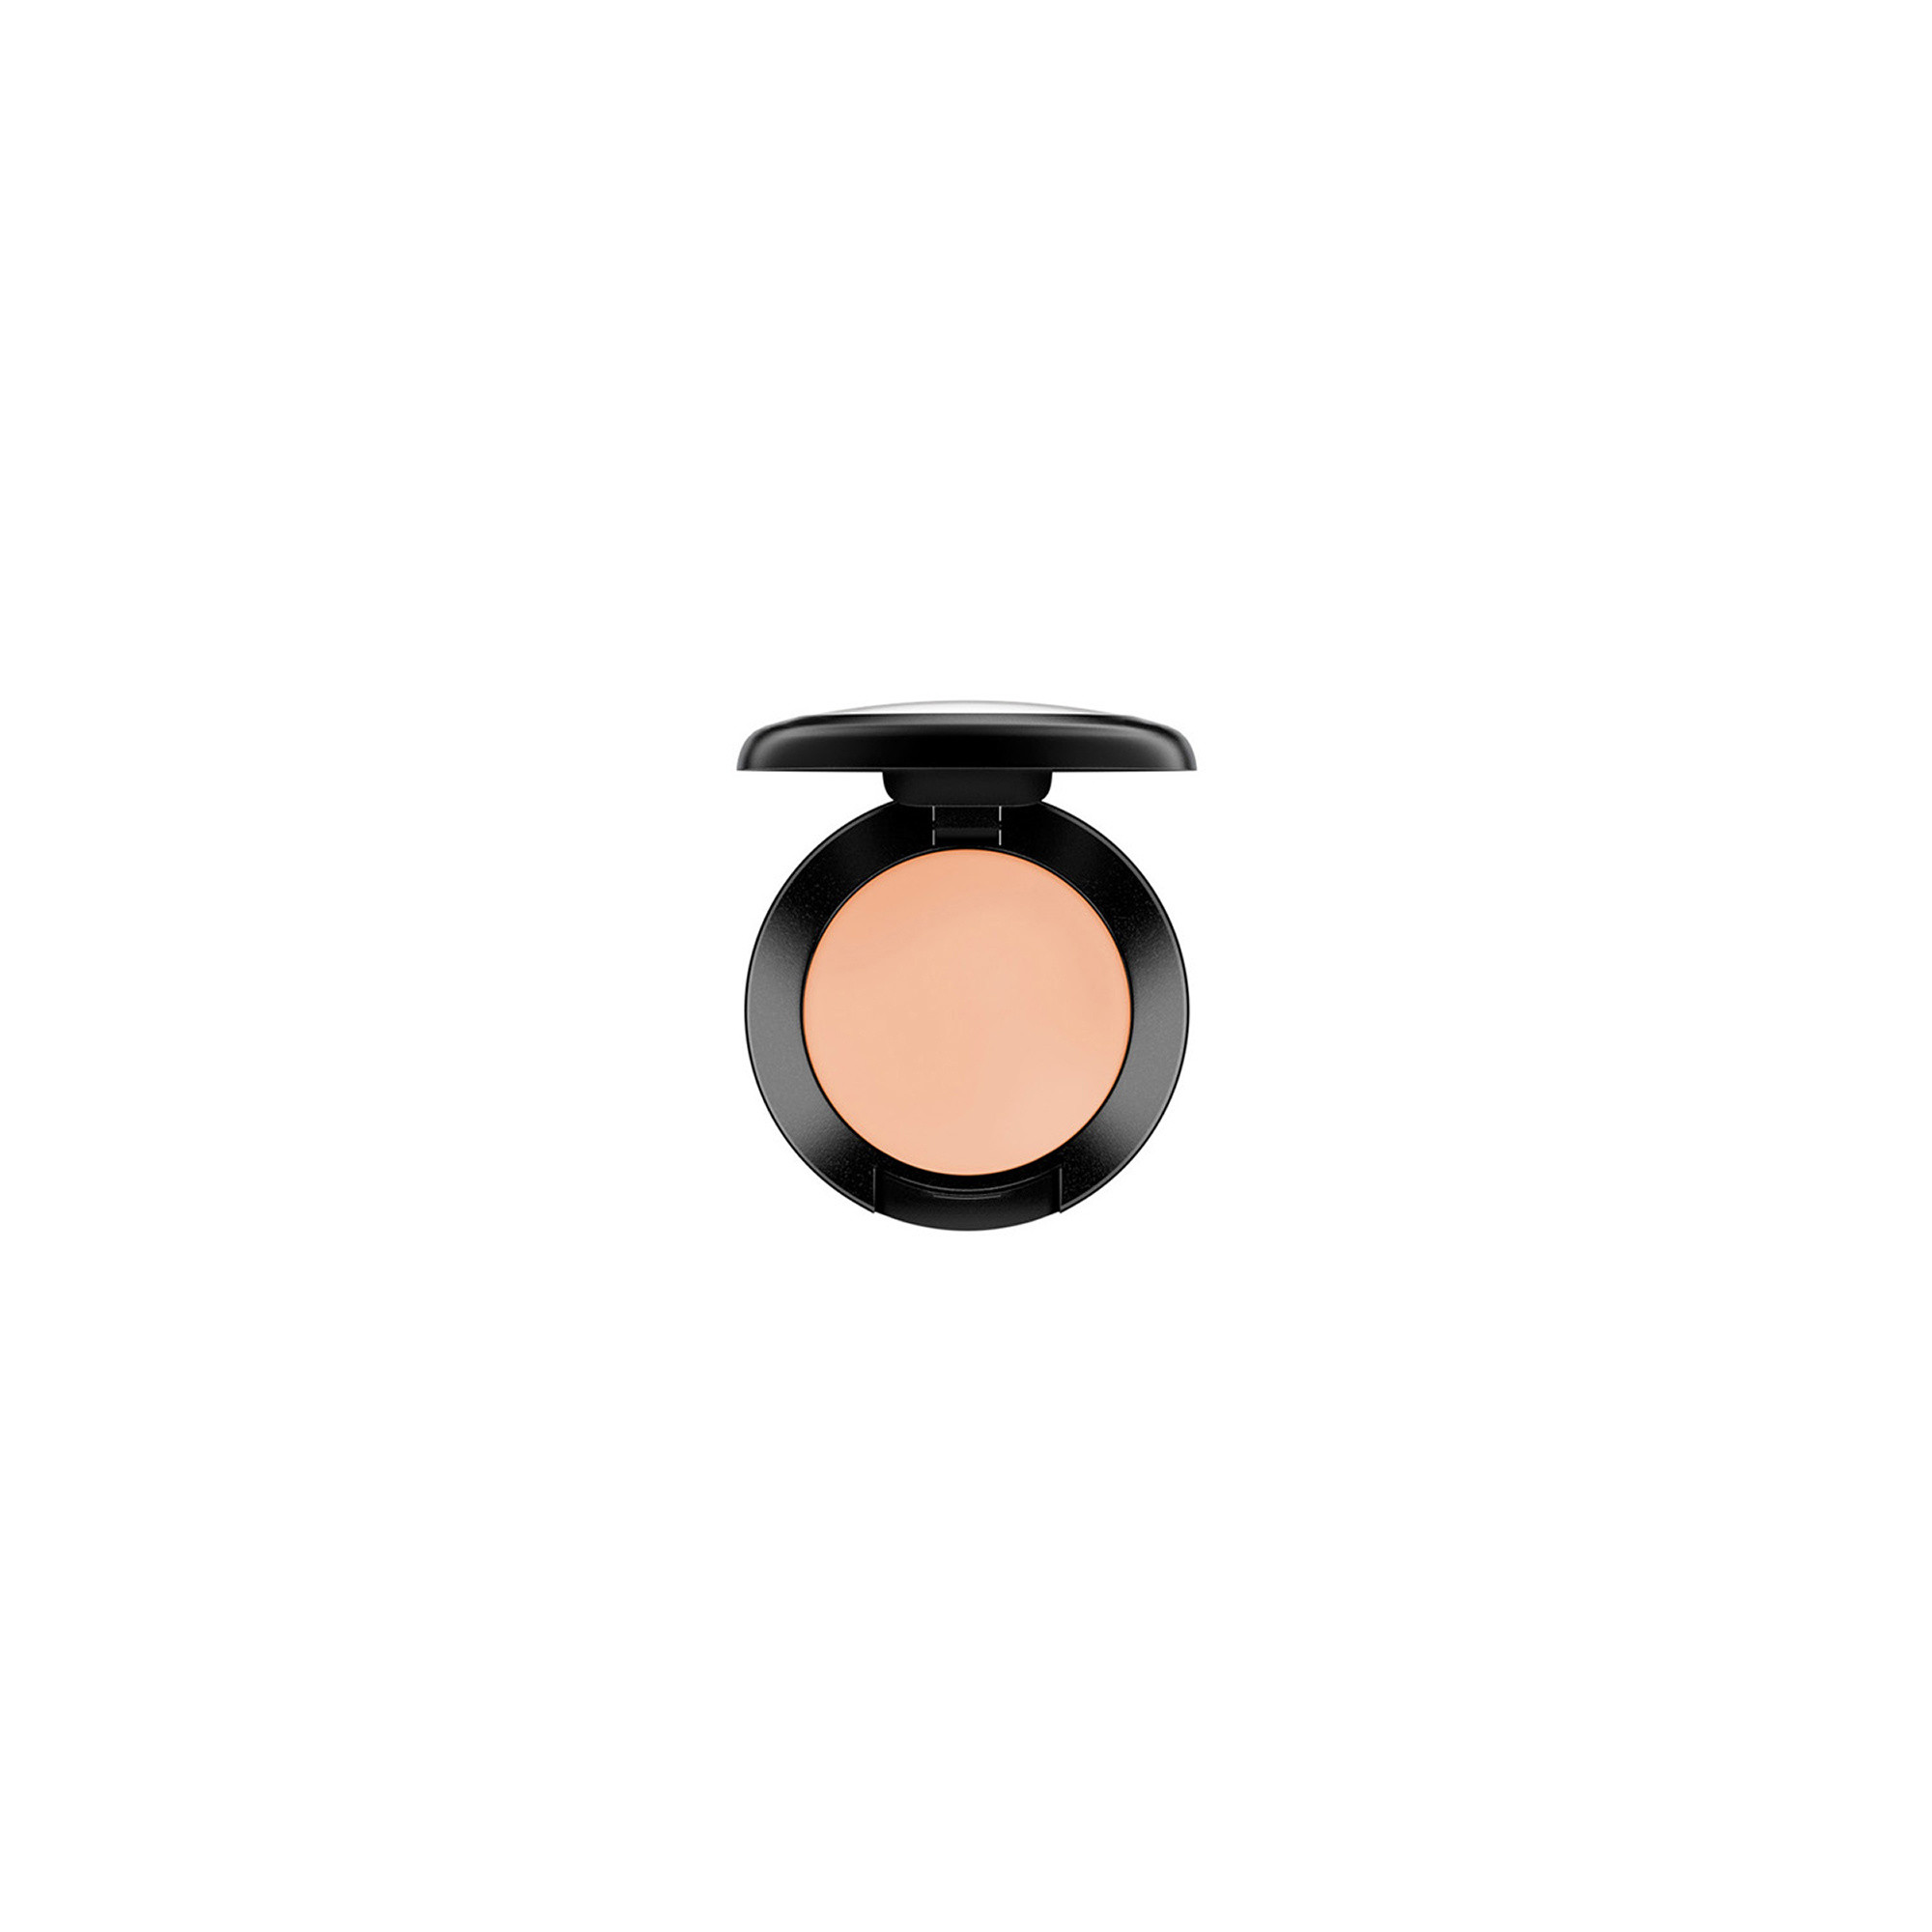 Studio Finish Concealer - NW30, NW30, large image number 0